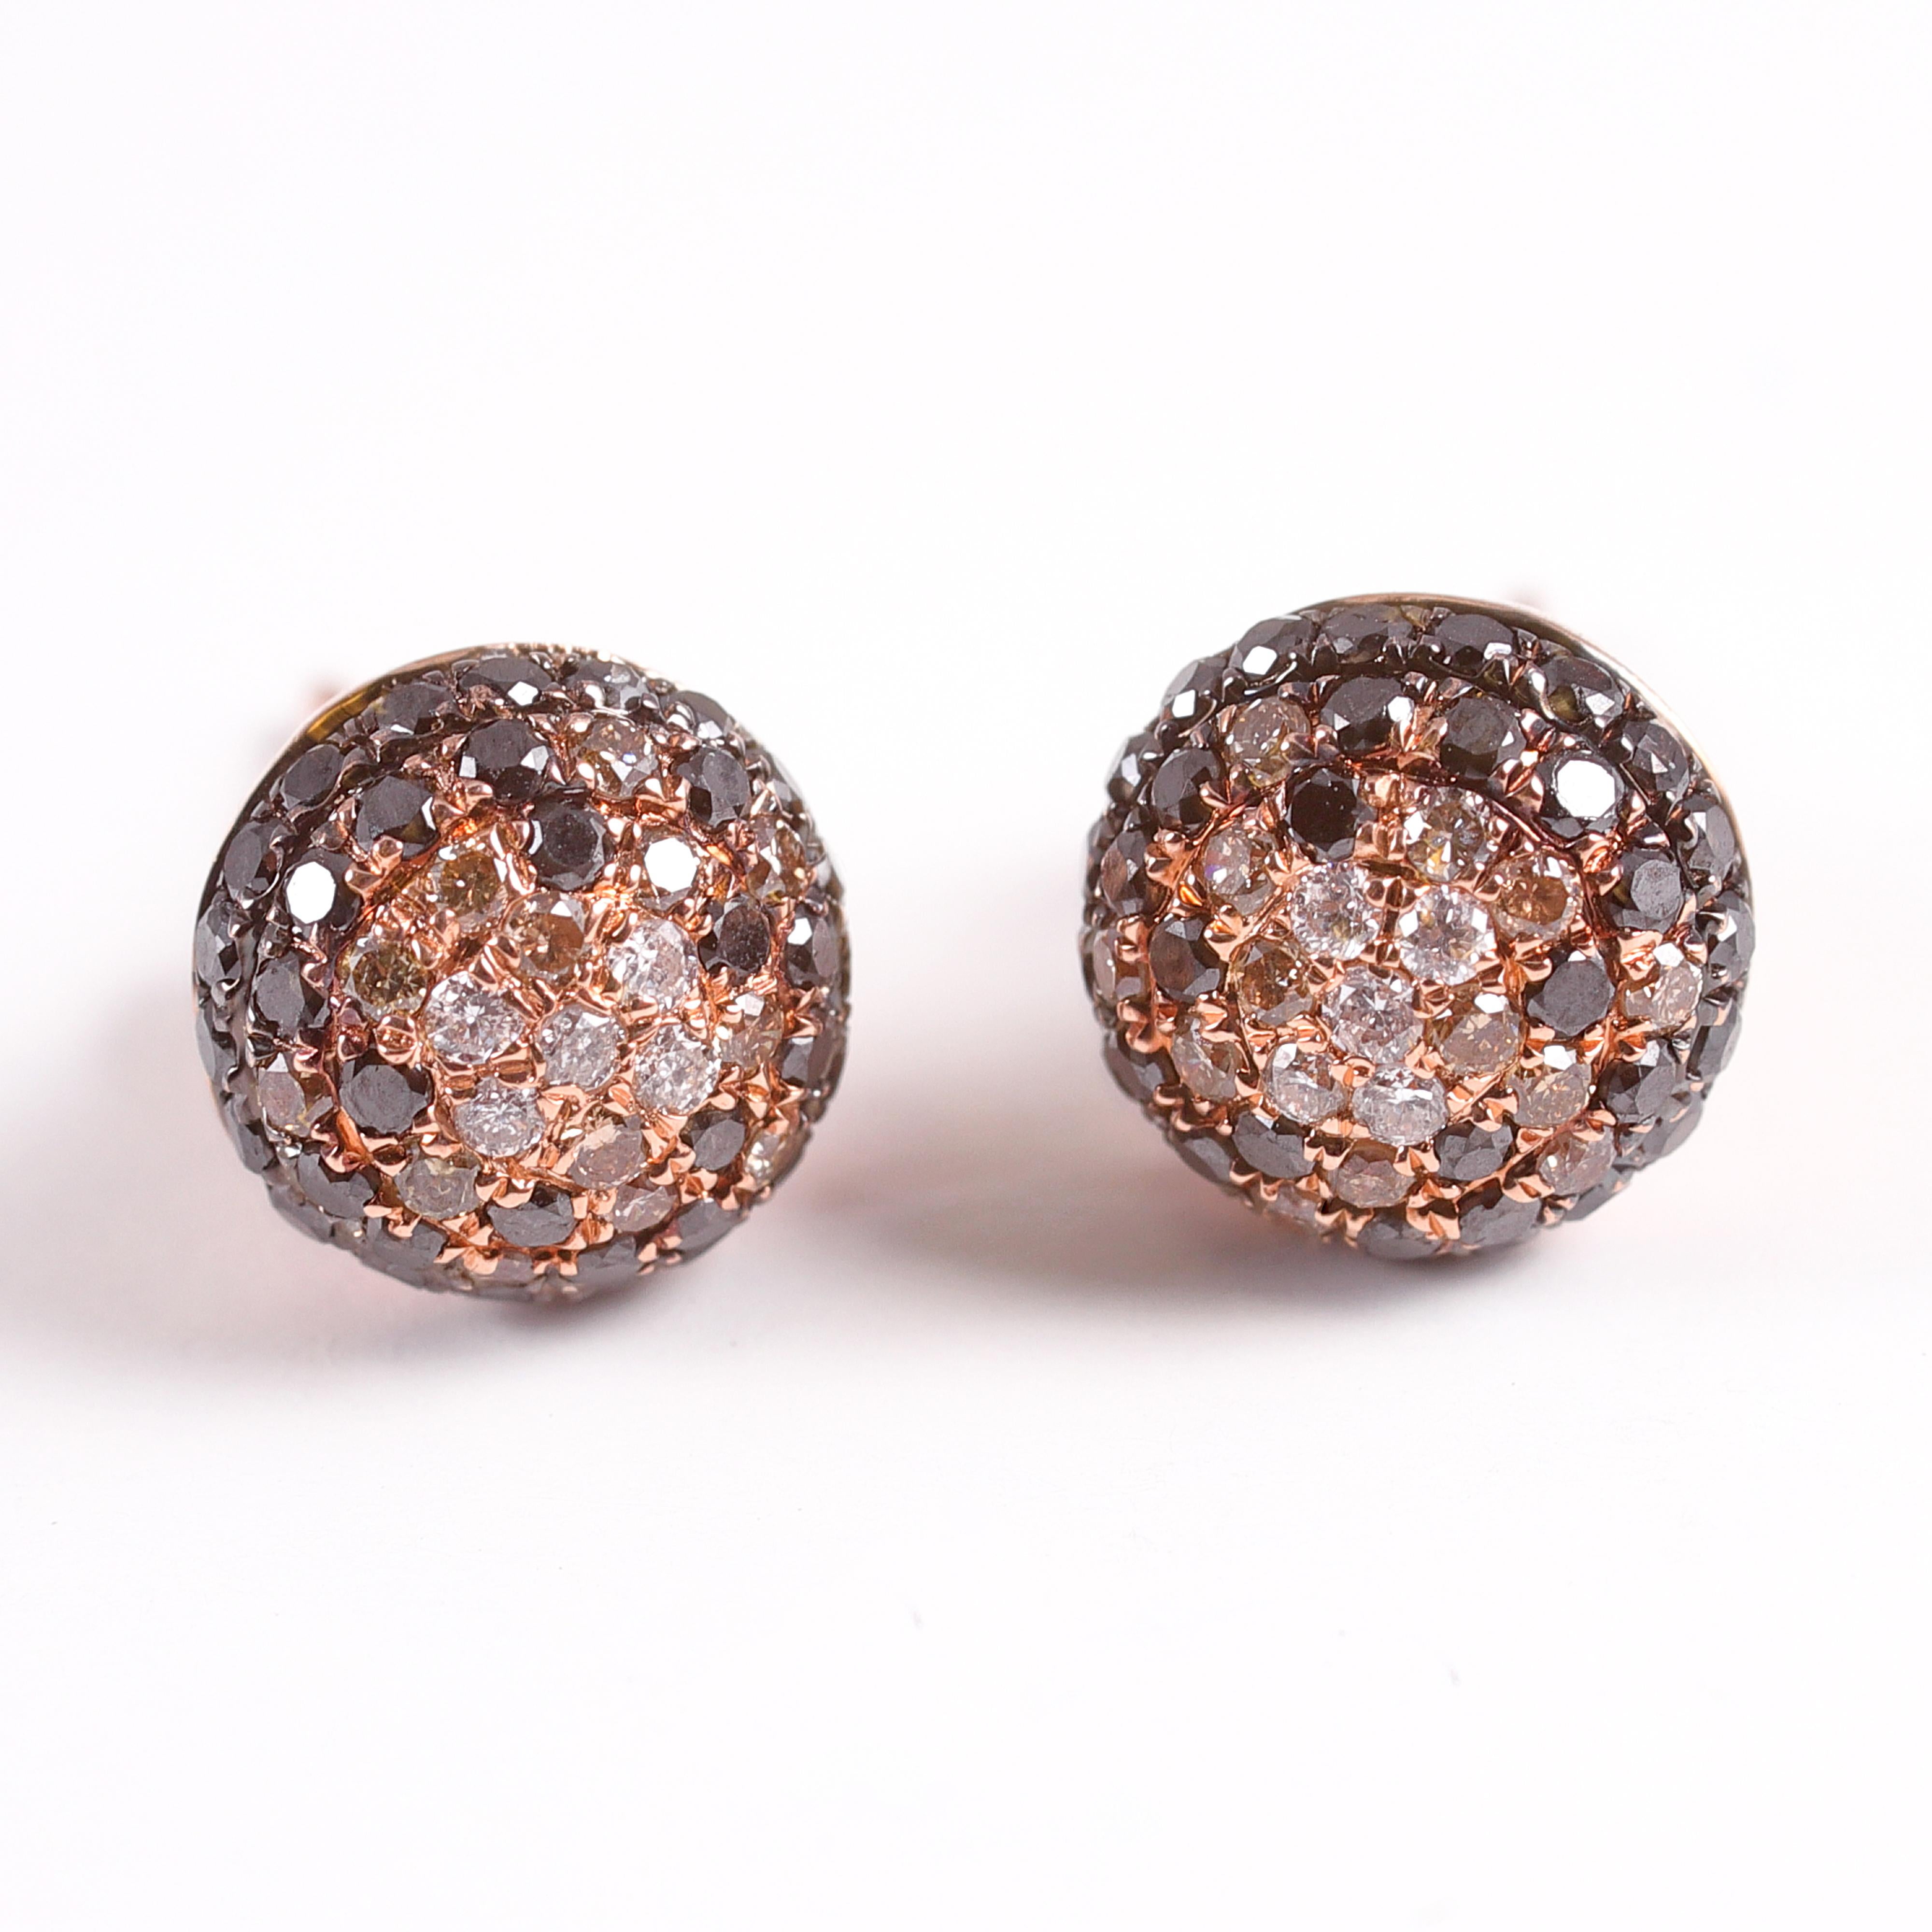 Pave set black and white diamond earrings set in 14 karat gold. These earrings by Effy are so versatile!